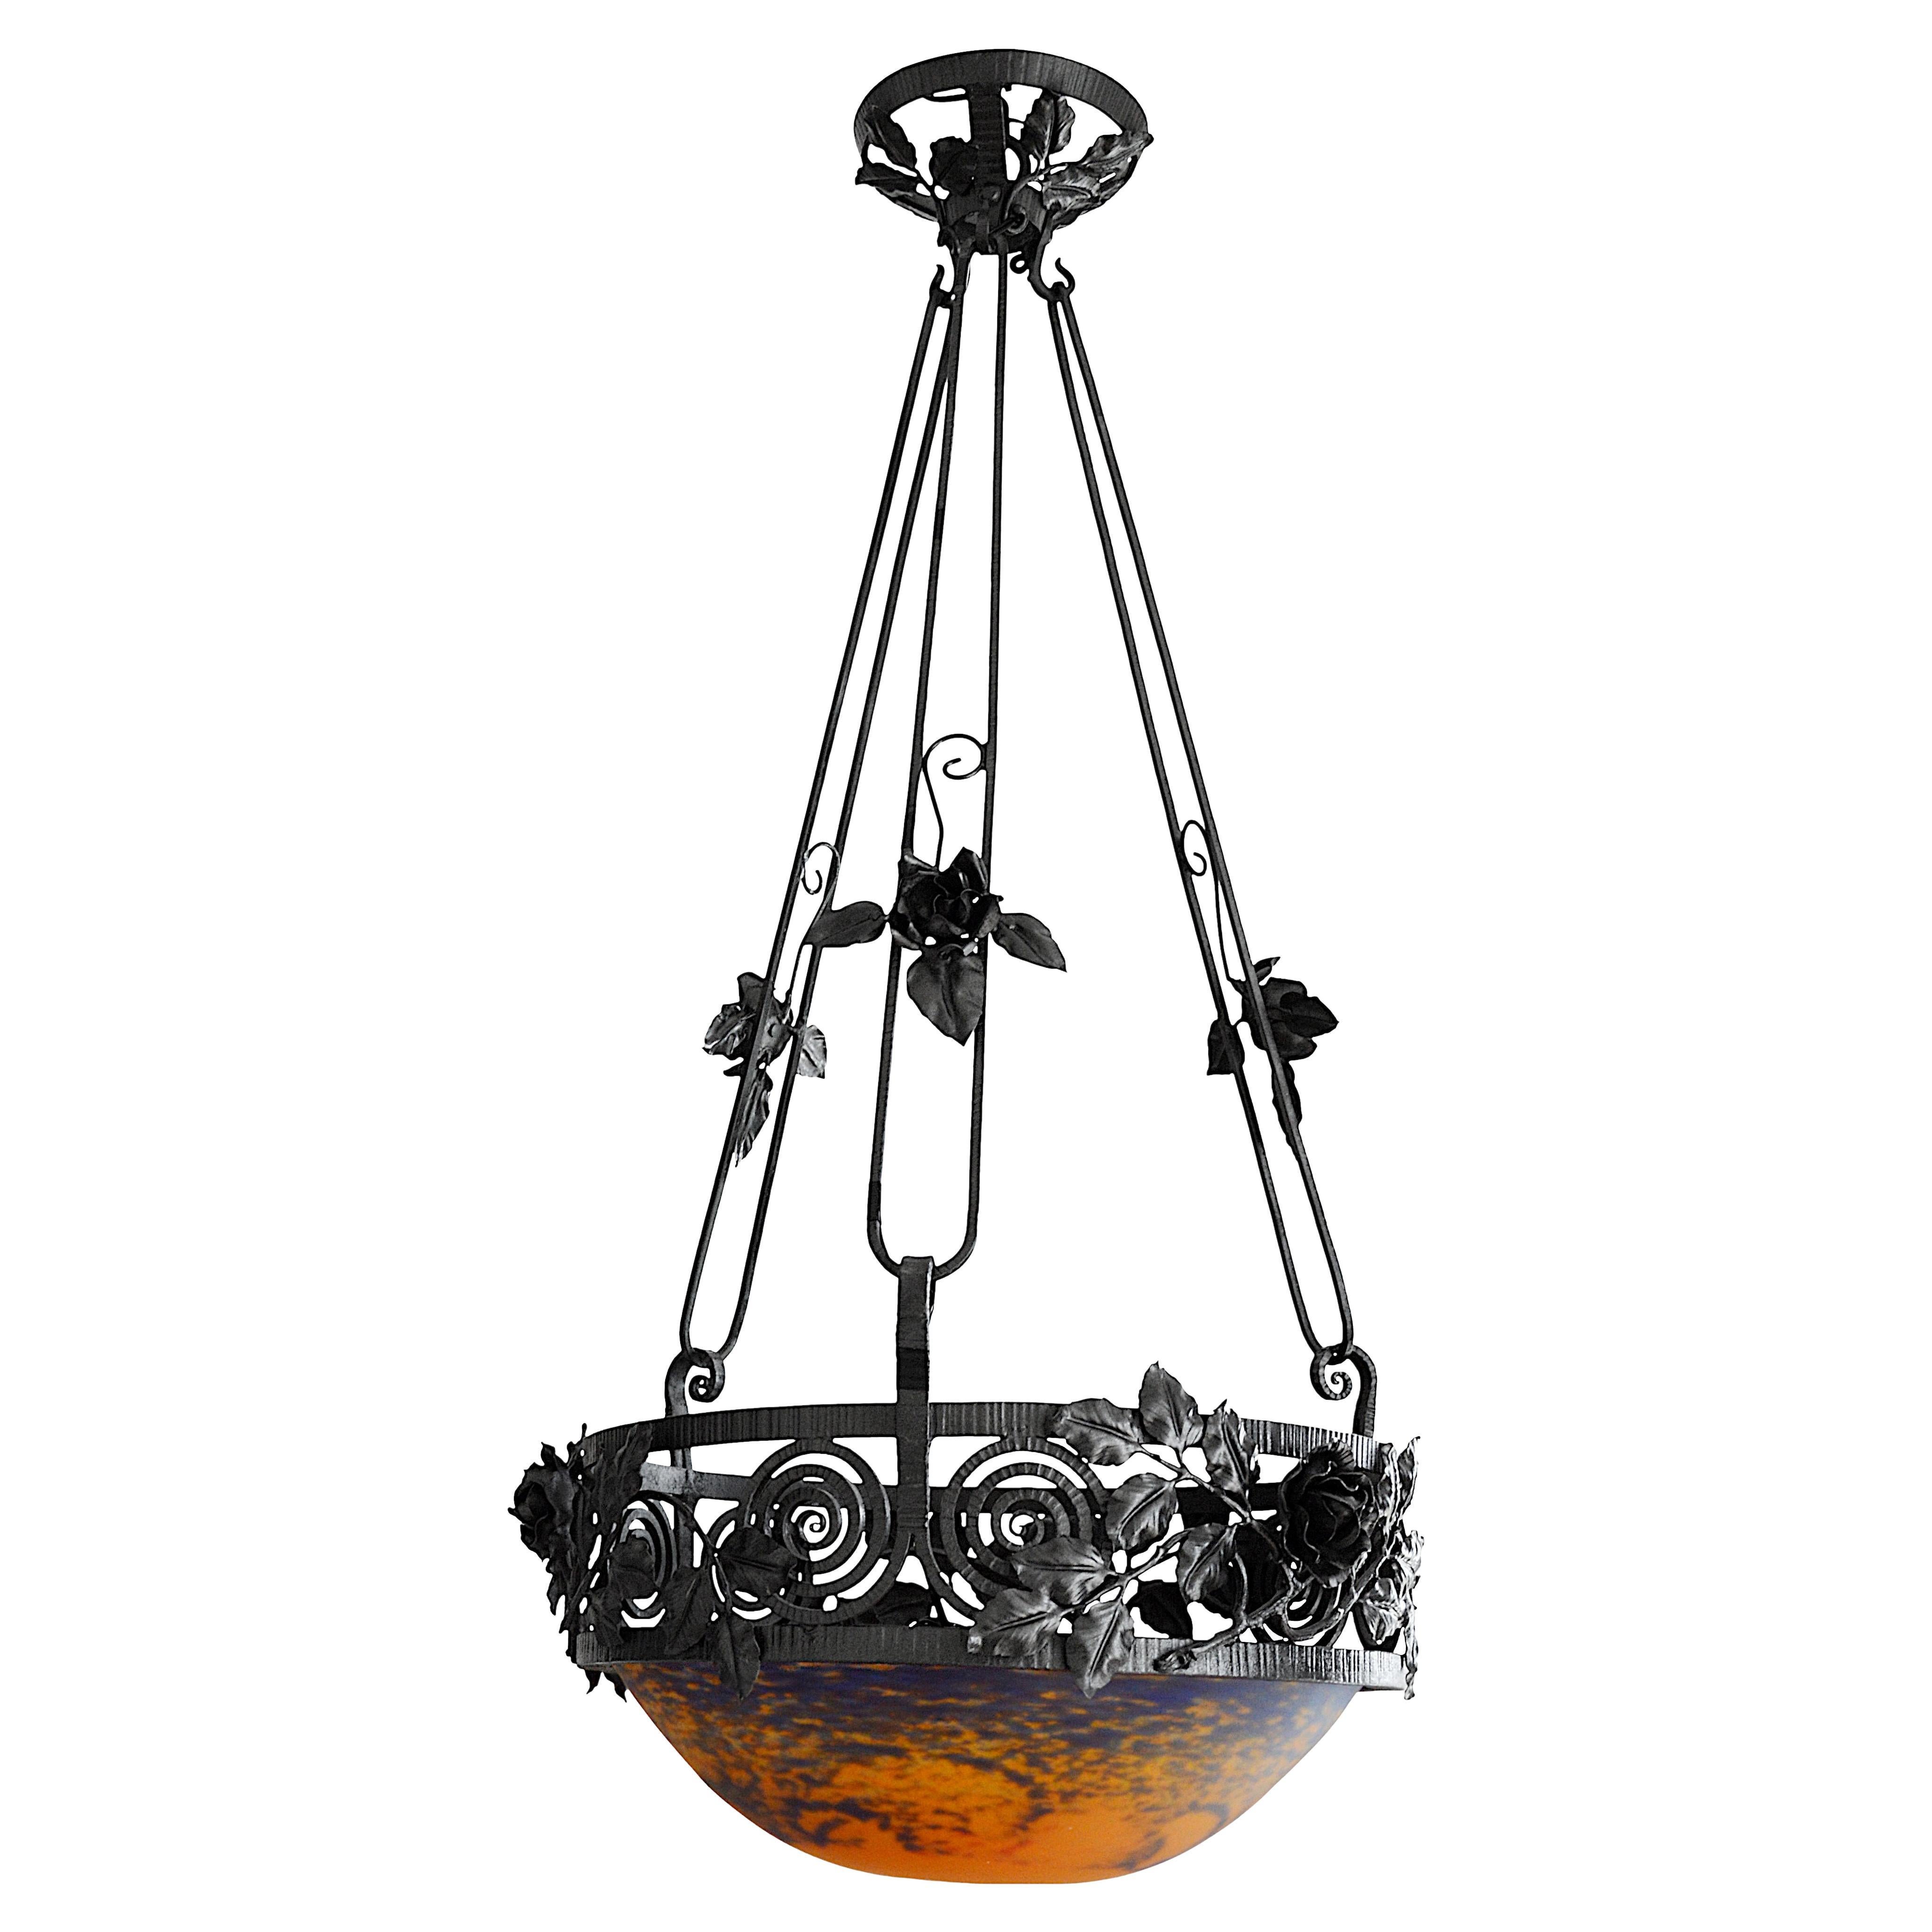 Jean Noverdy French Art Deco Wrought-Iron Pendant Chandelier, Late 1920s For Sale